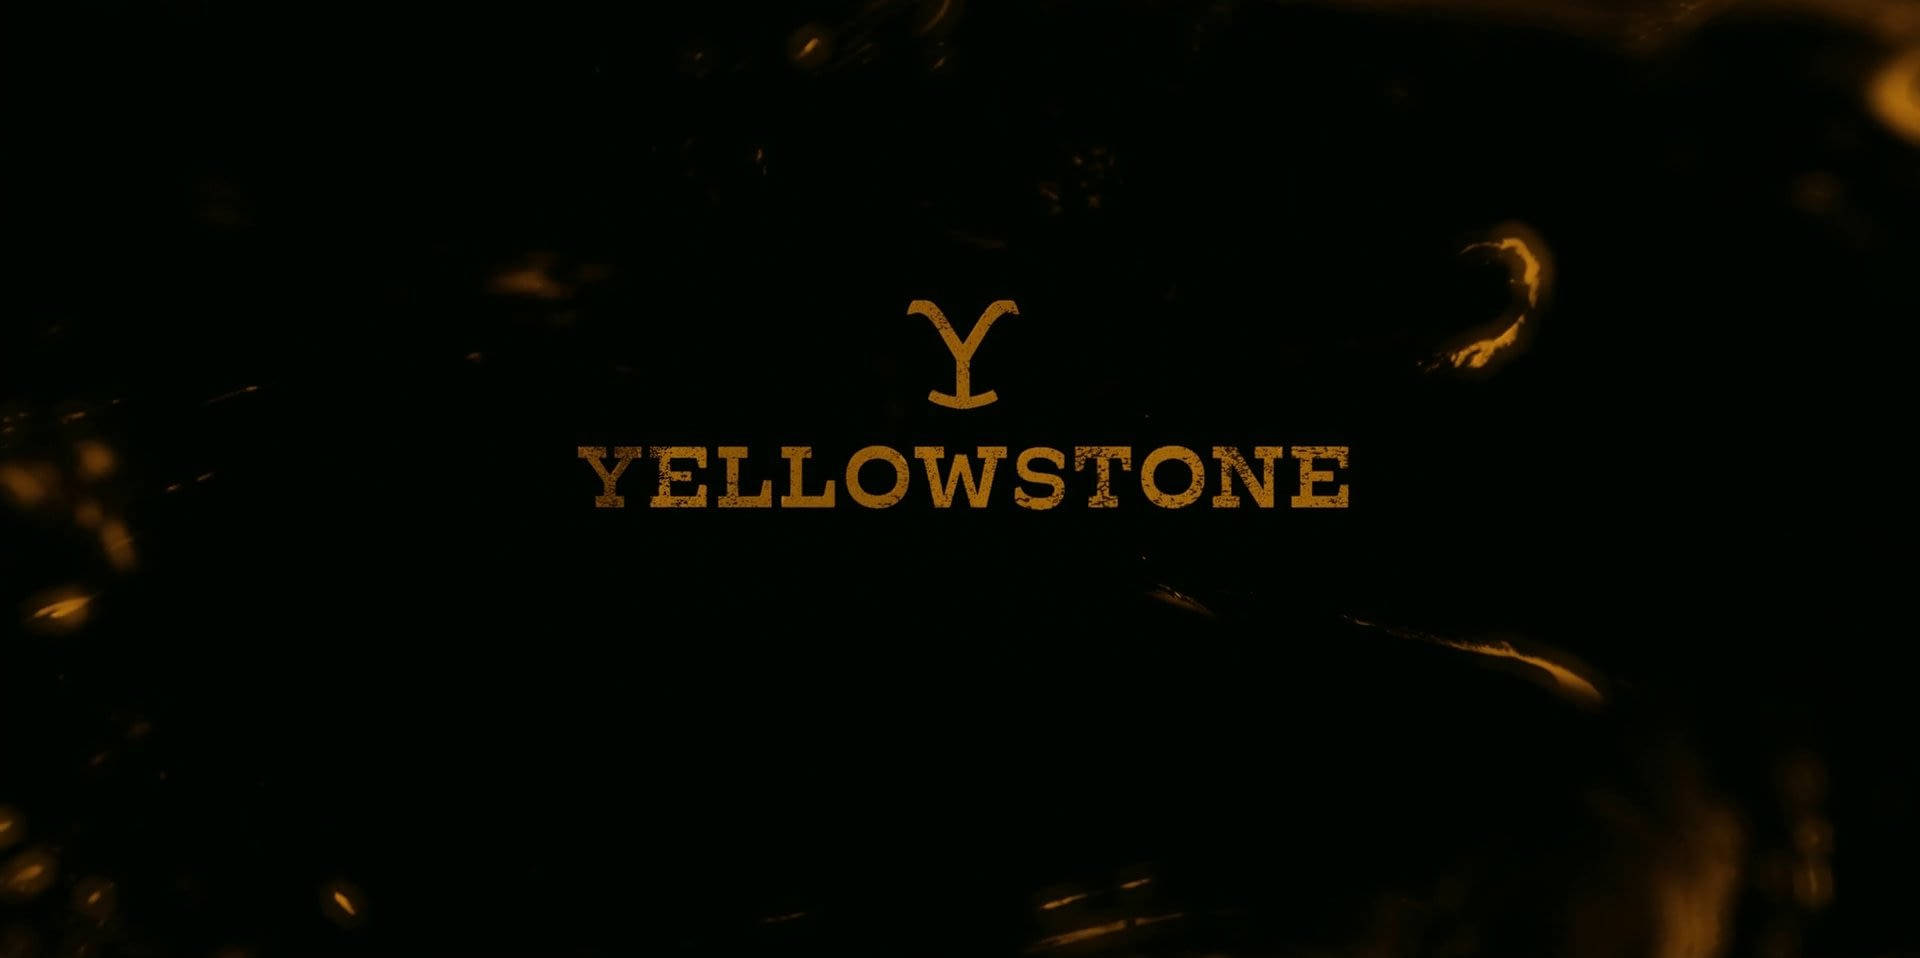 Top 999+ Yellowstone Tv Show Wallpaper Full HD, 4K✅Free to Use